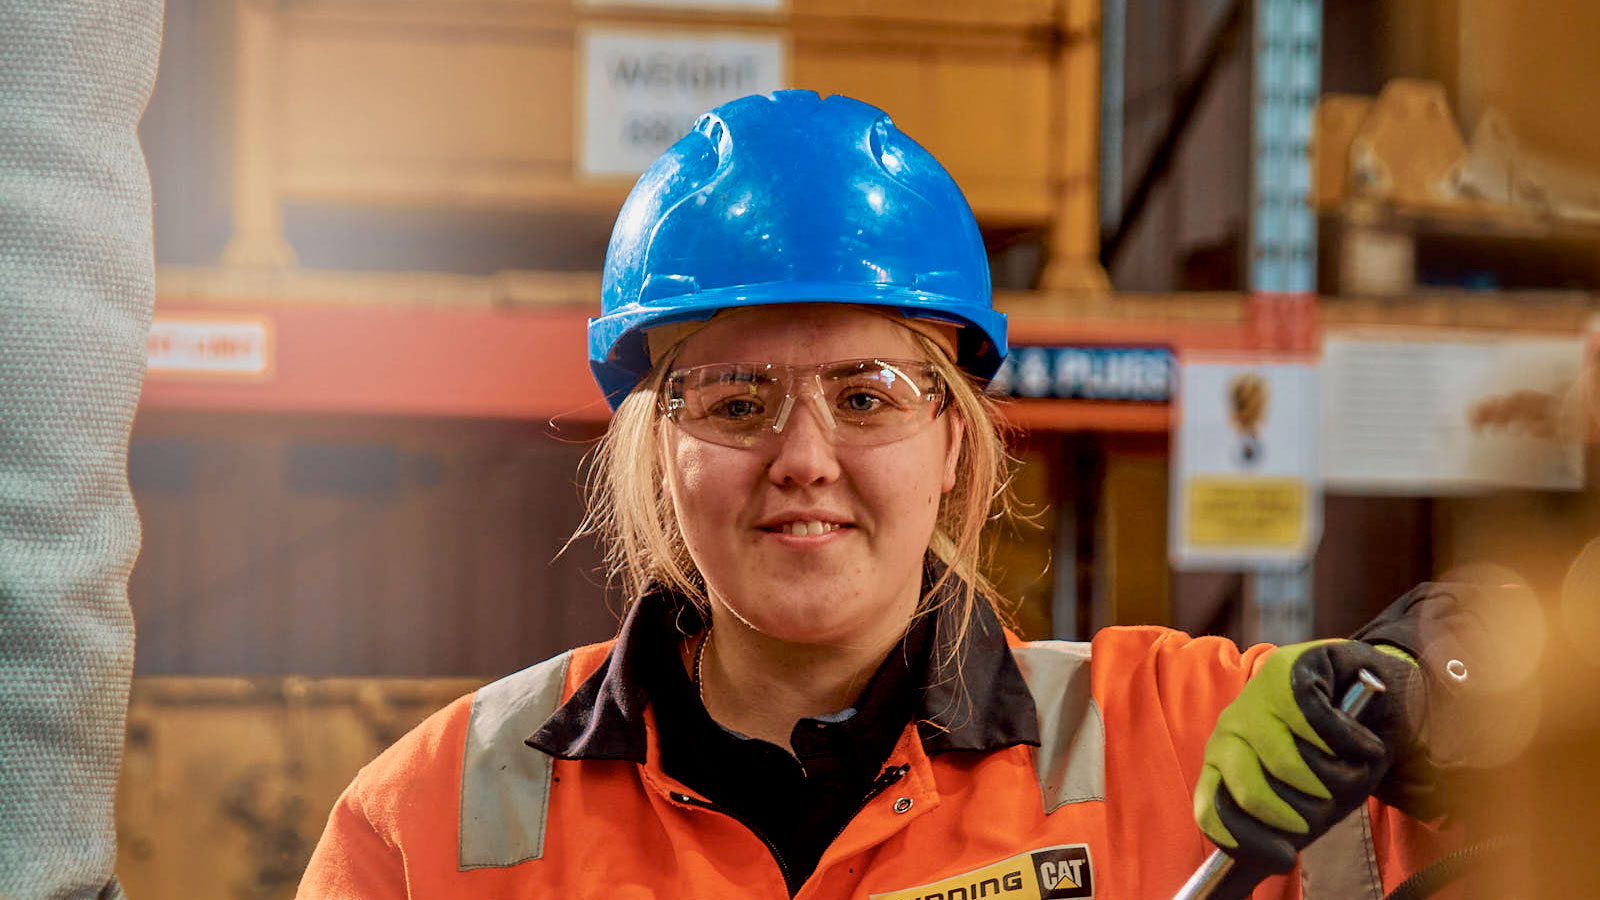 Finning has announced the expansion of its apprenticeship program, aiming to fill up to 44 new apprentice engineer positions.